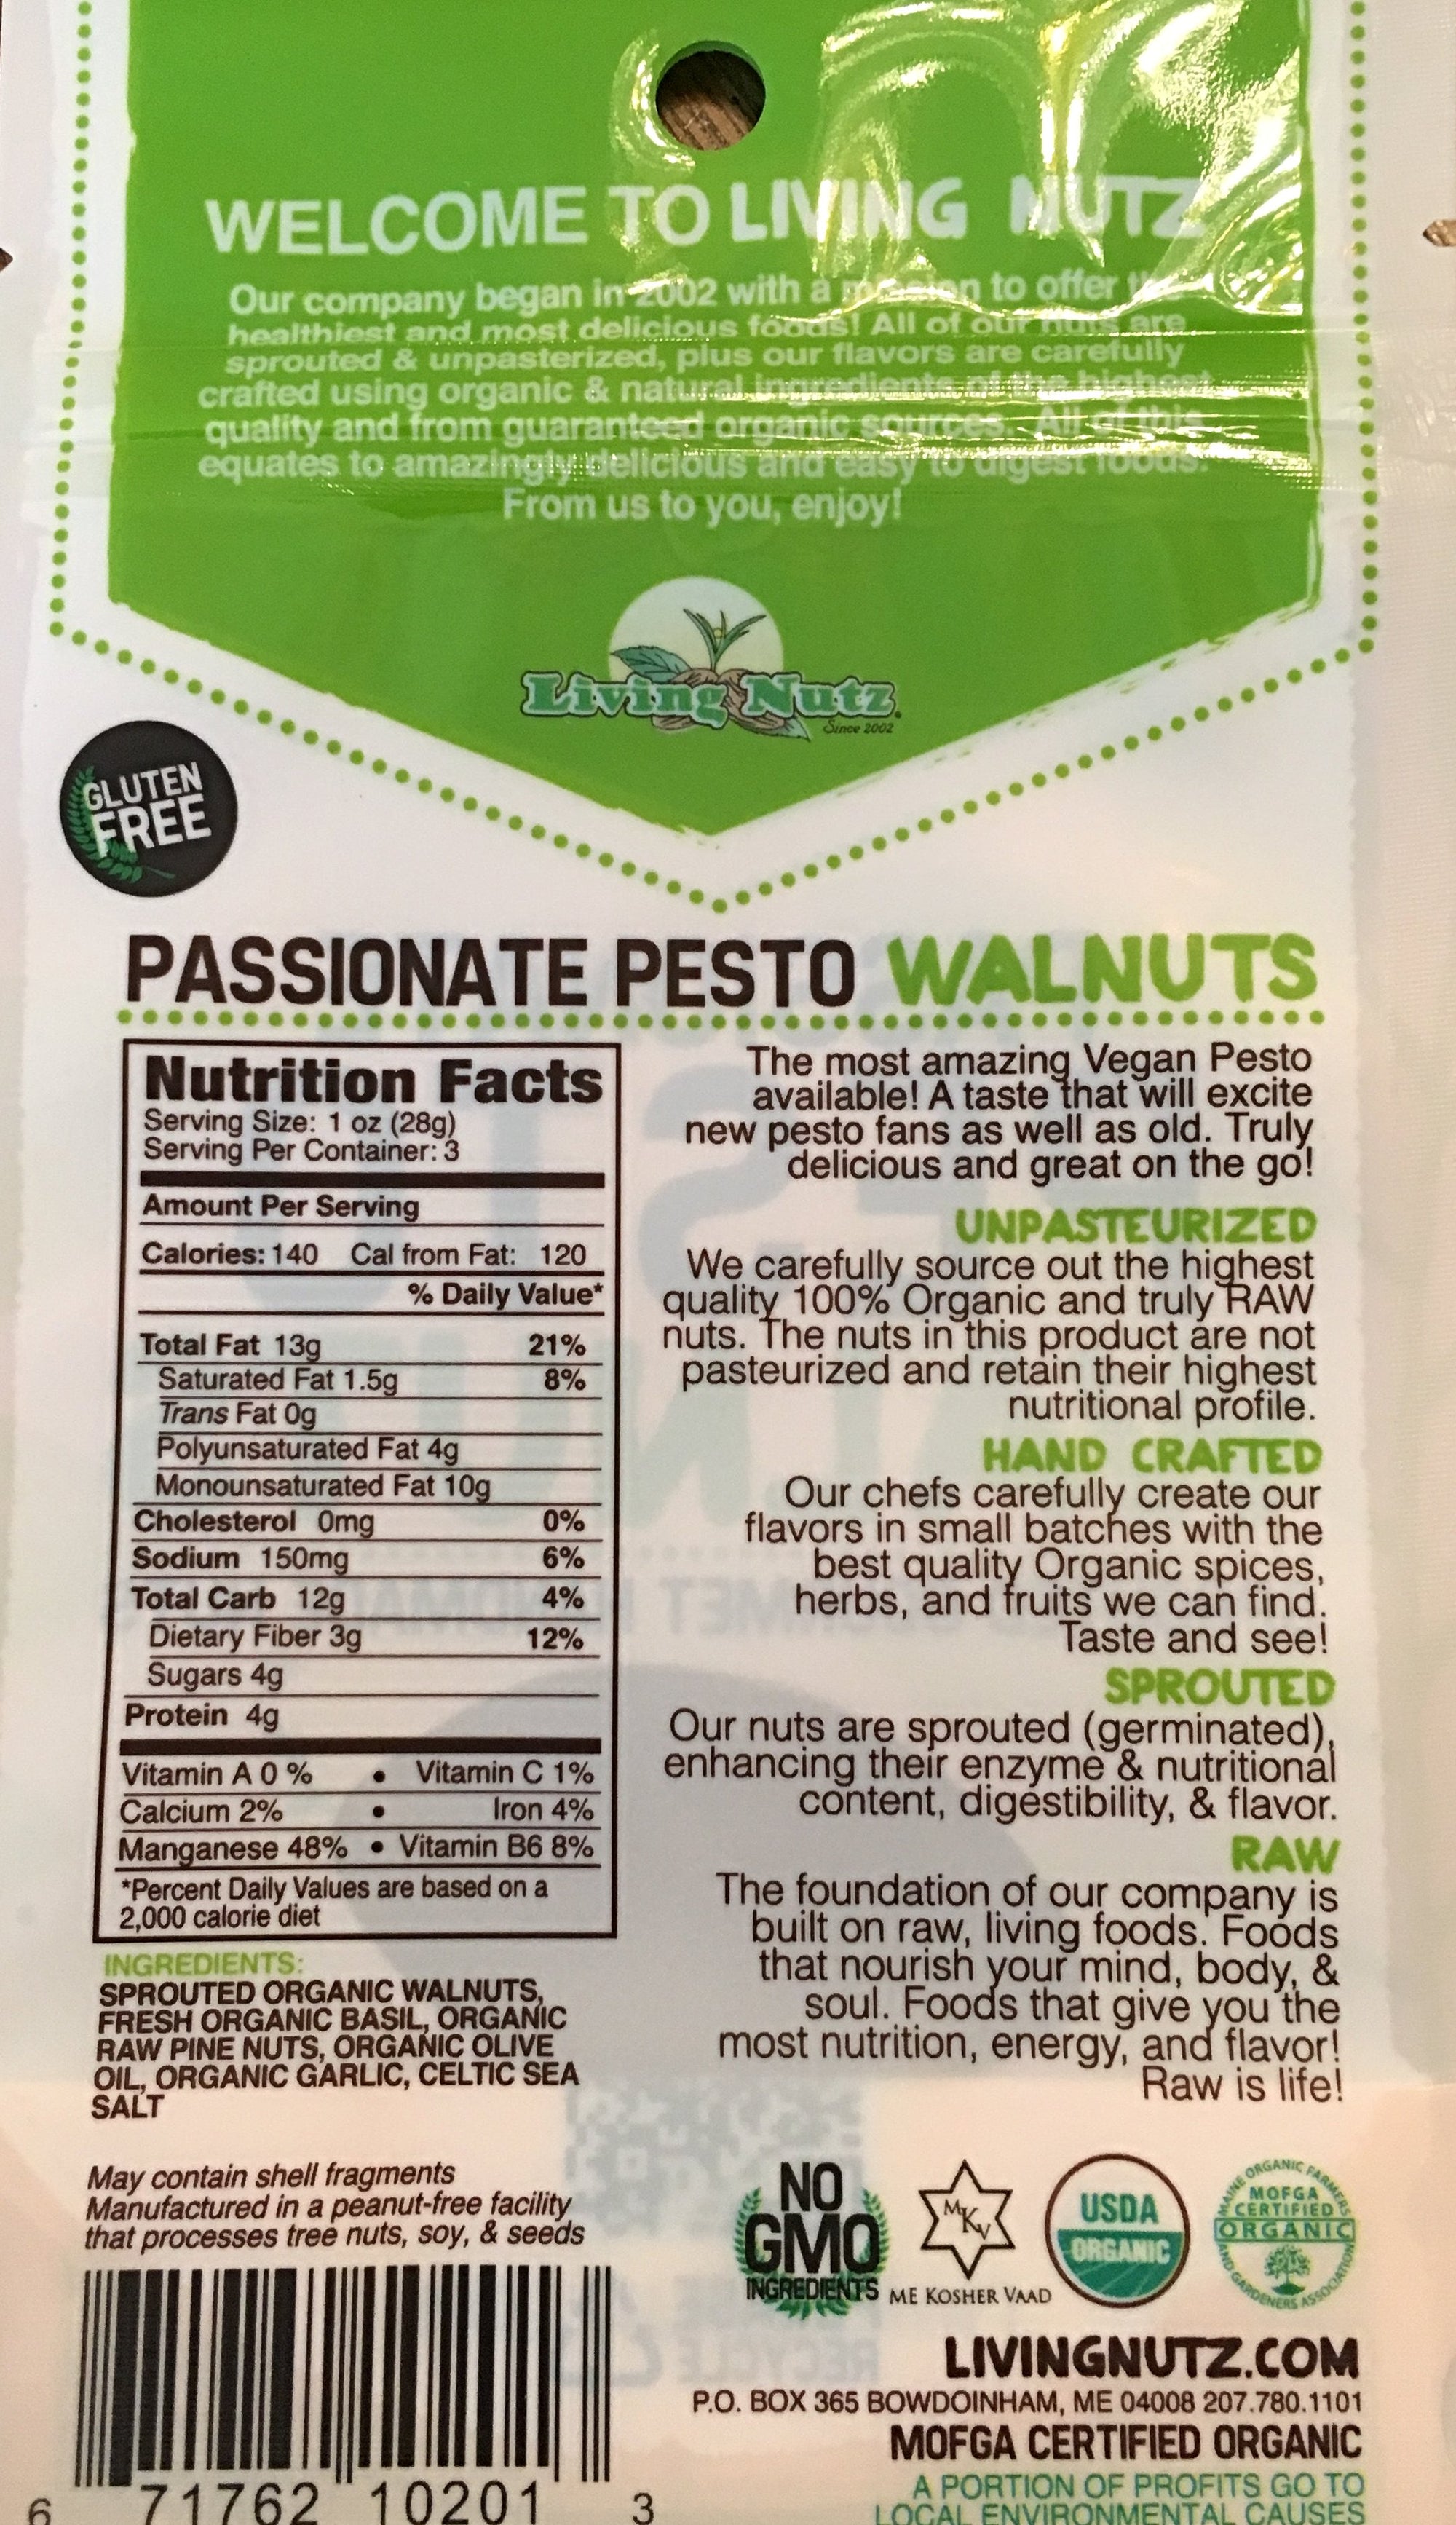 Organic raw sprouted nuts. Sprouted flavored raw walnuts & pesto. Organic nut snacks. Living nuts.